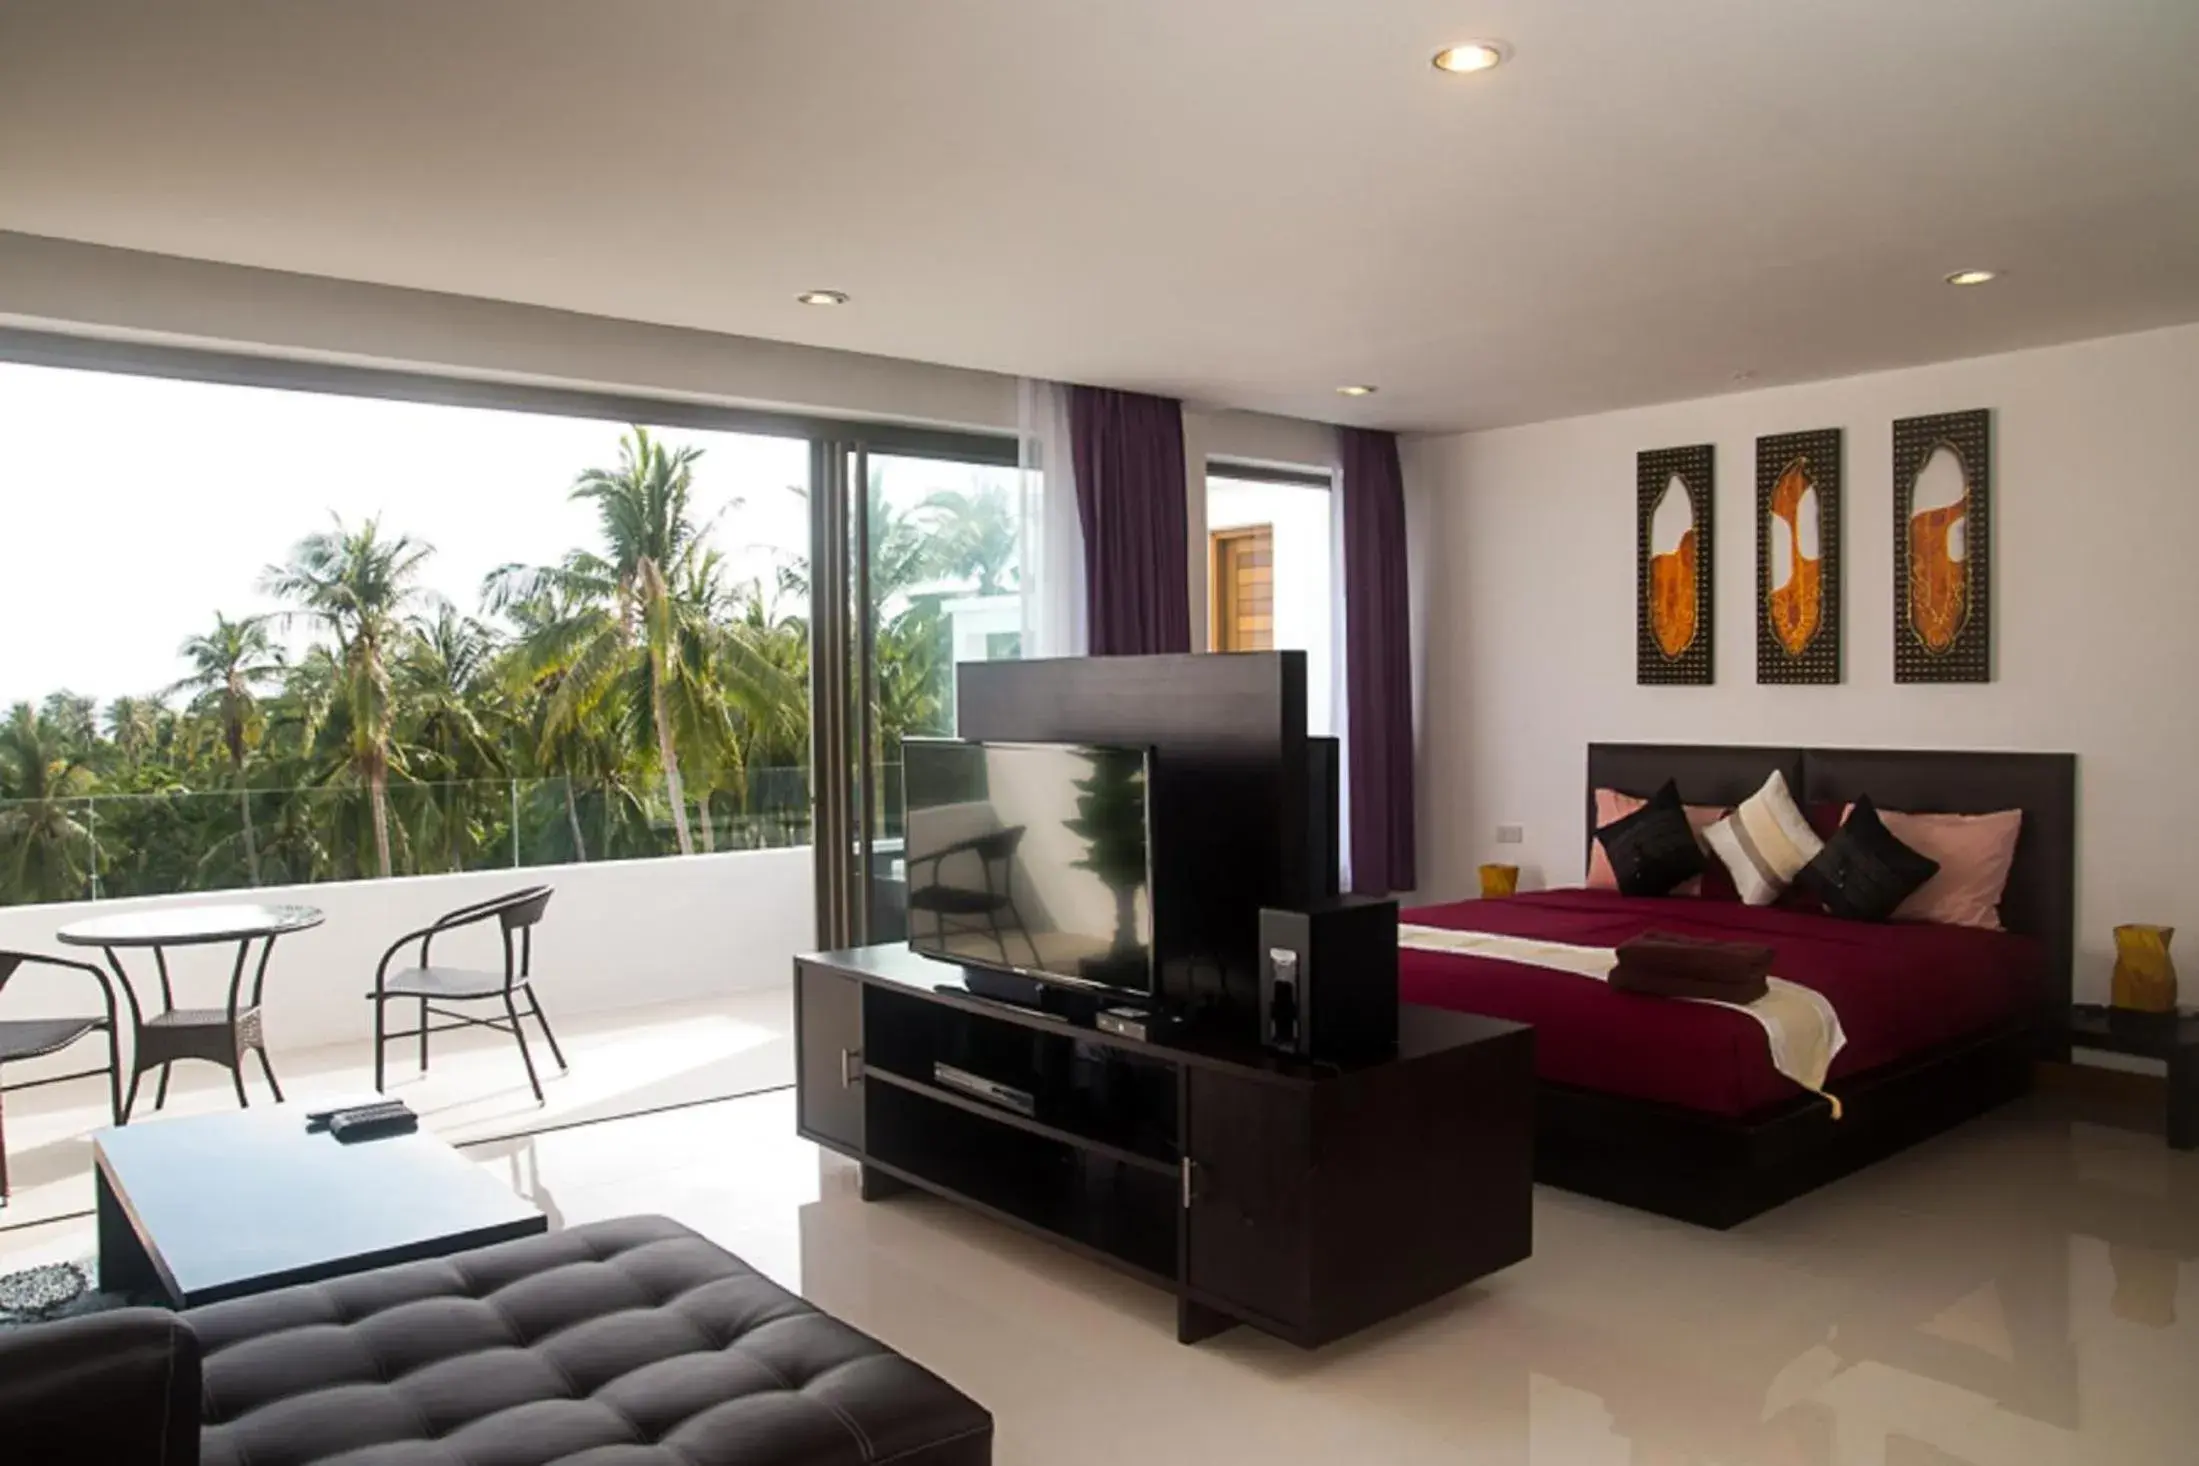 Seating Area in Tropical Sea View Residence